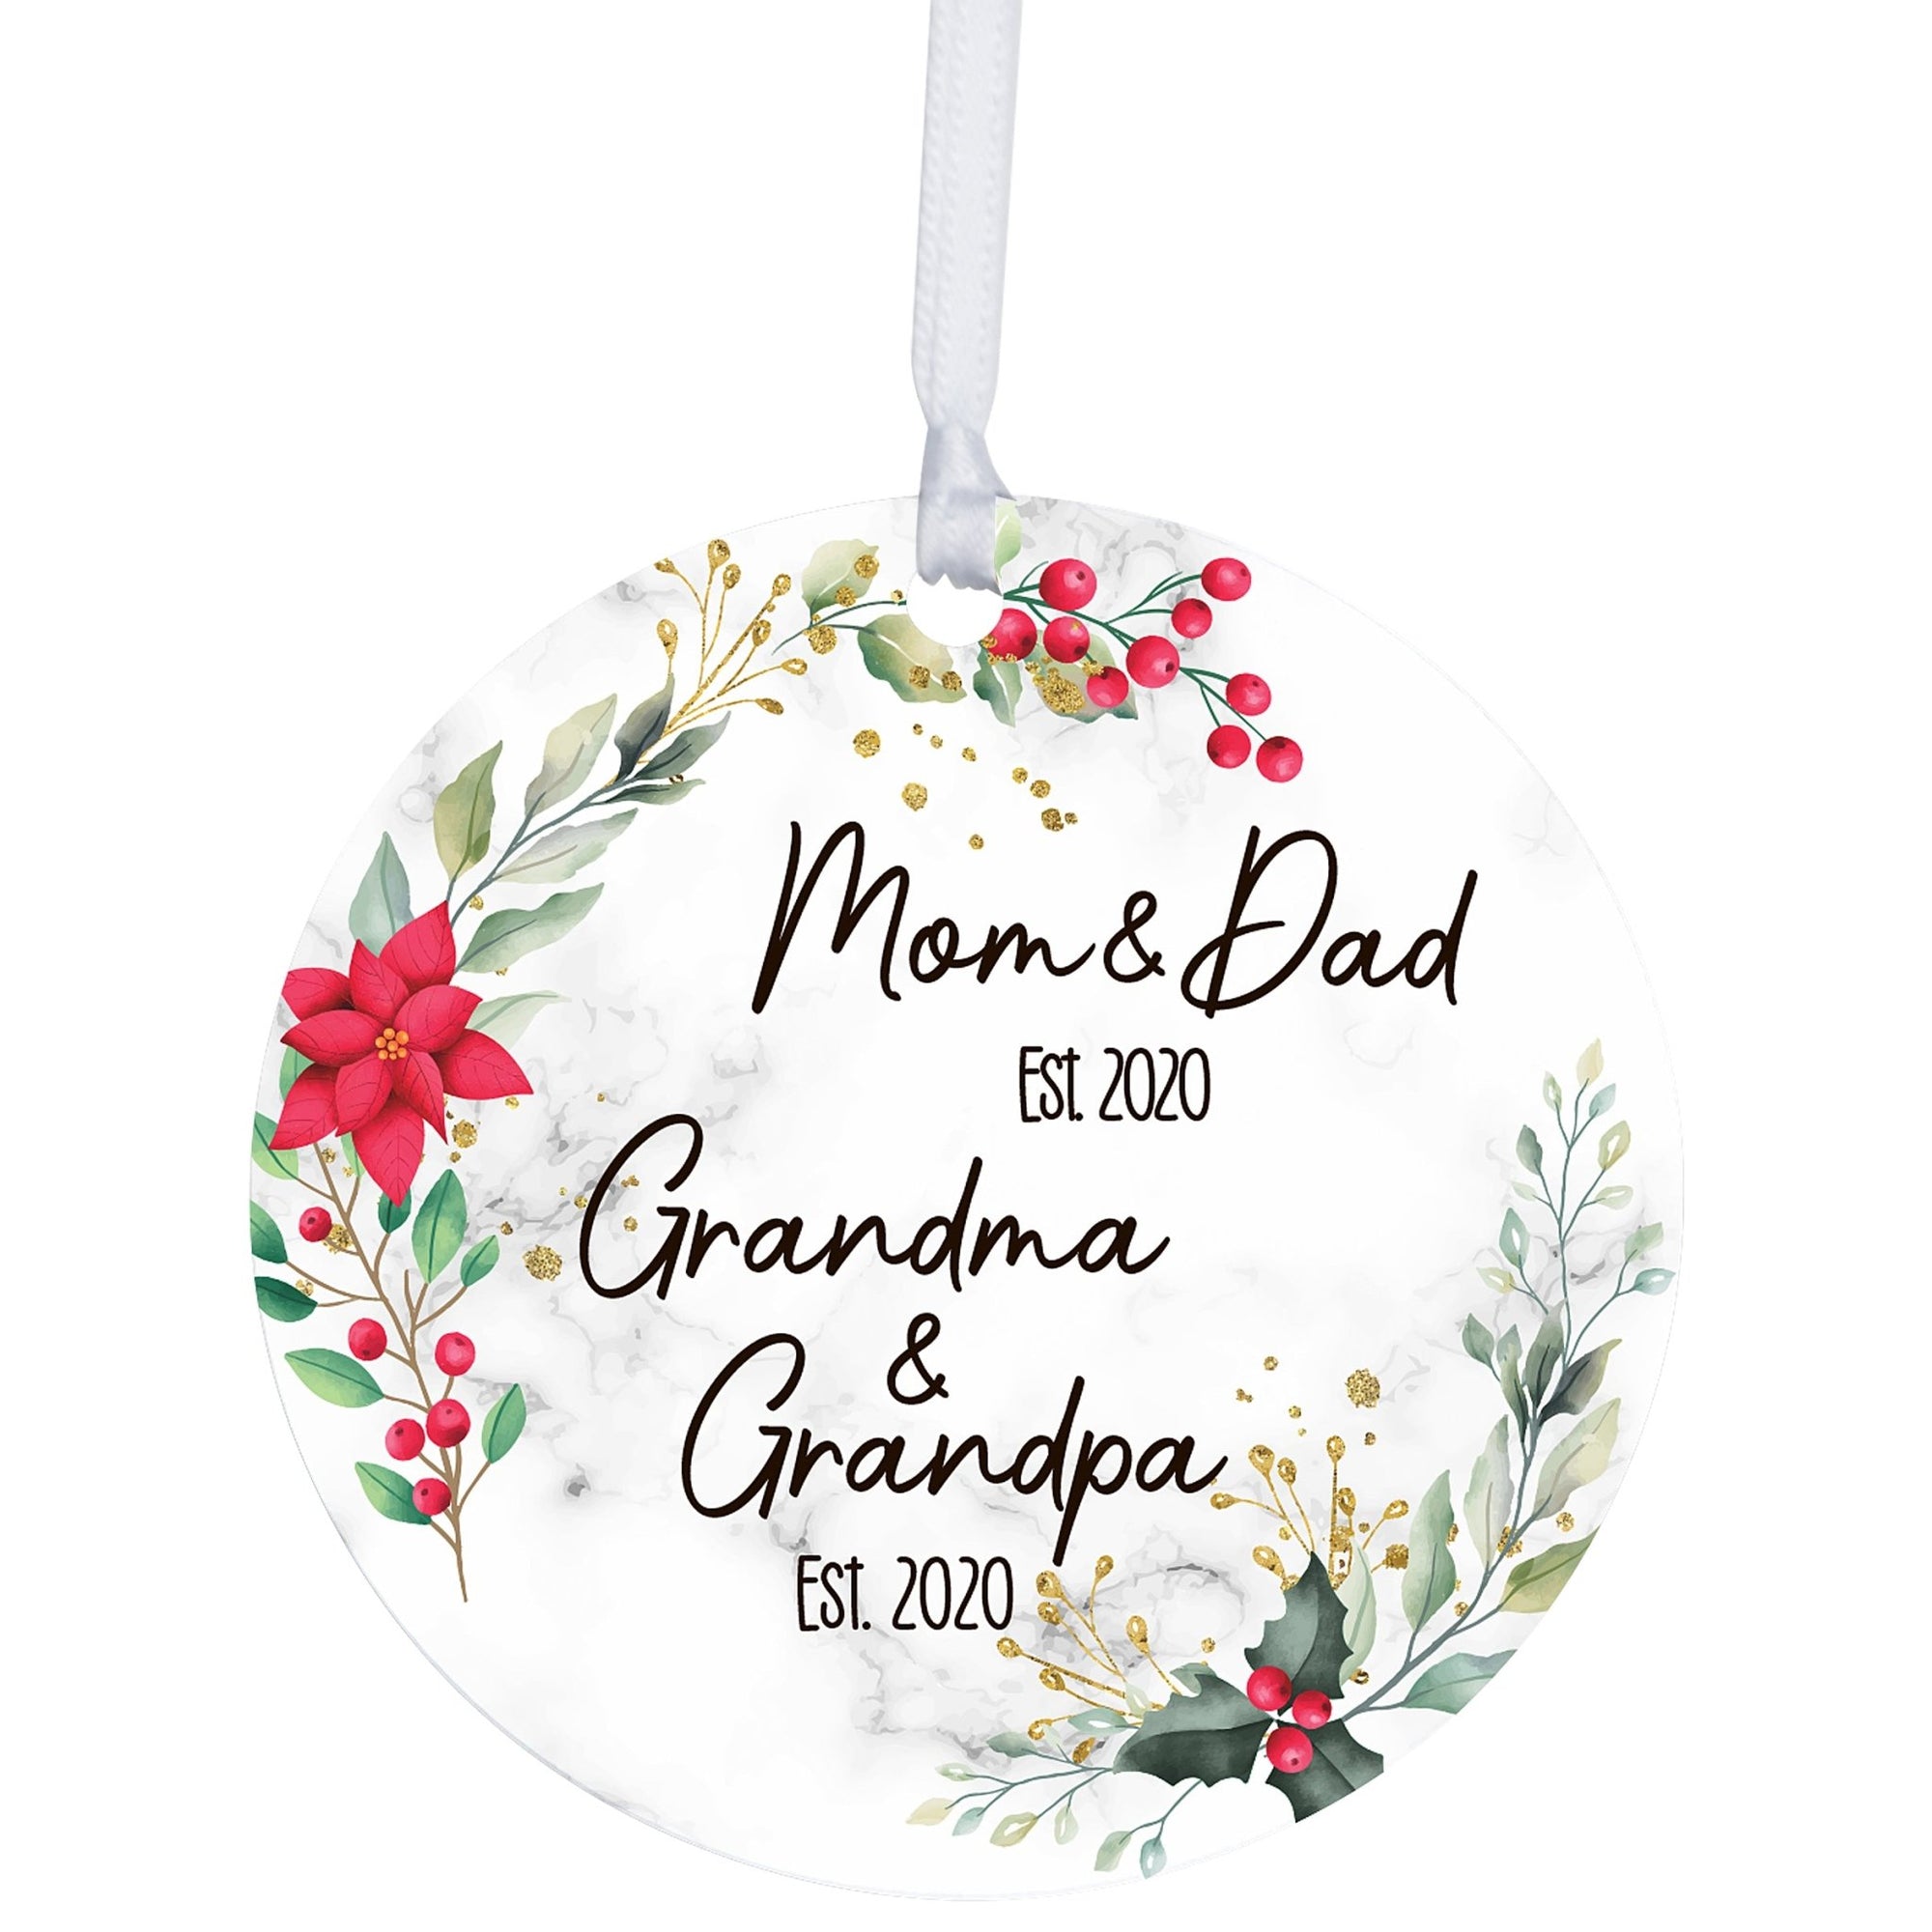 Personalized Modern 2.75in Christmas Round White Ornament for Grandparents - Mom & Dad - LifeSong Milestones